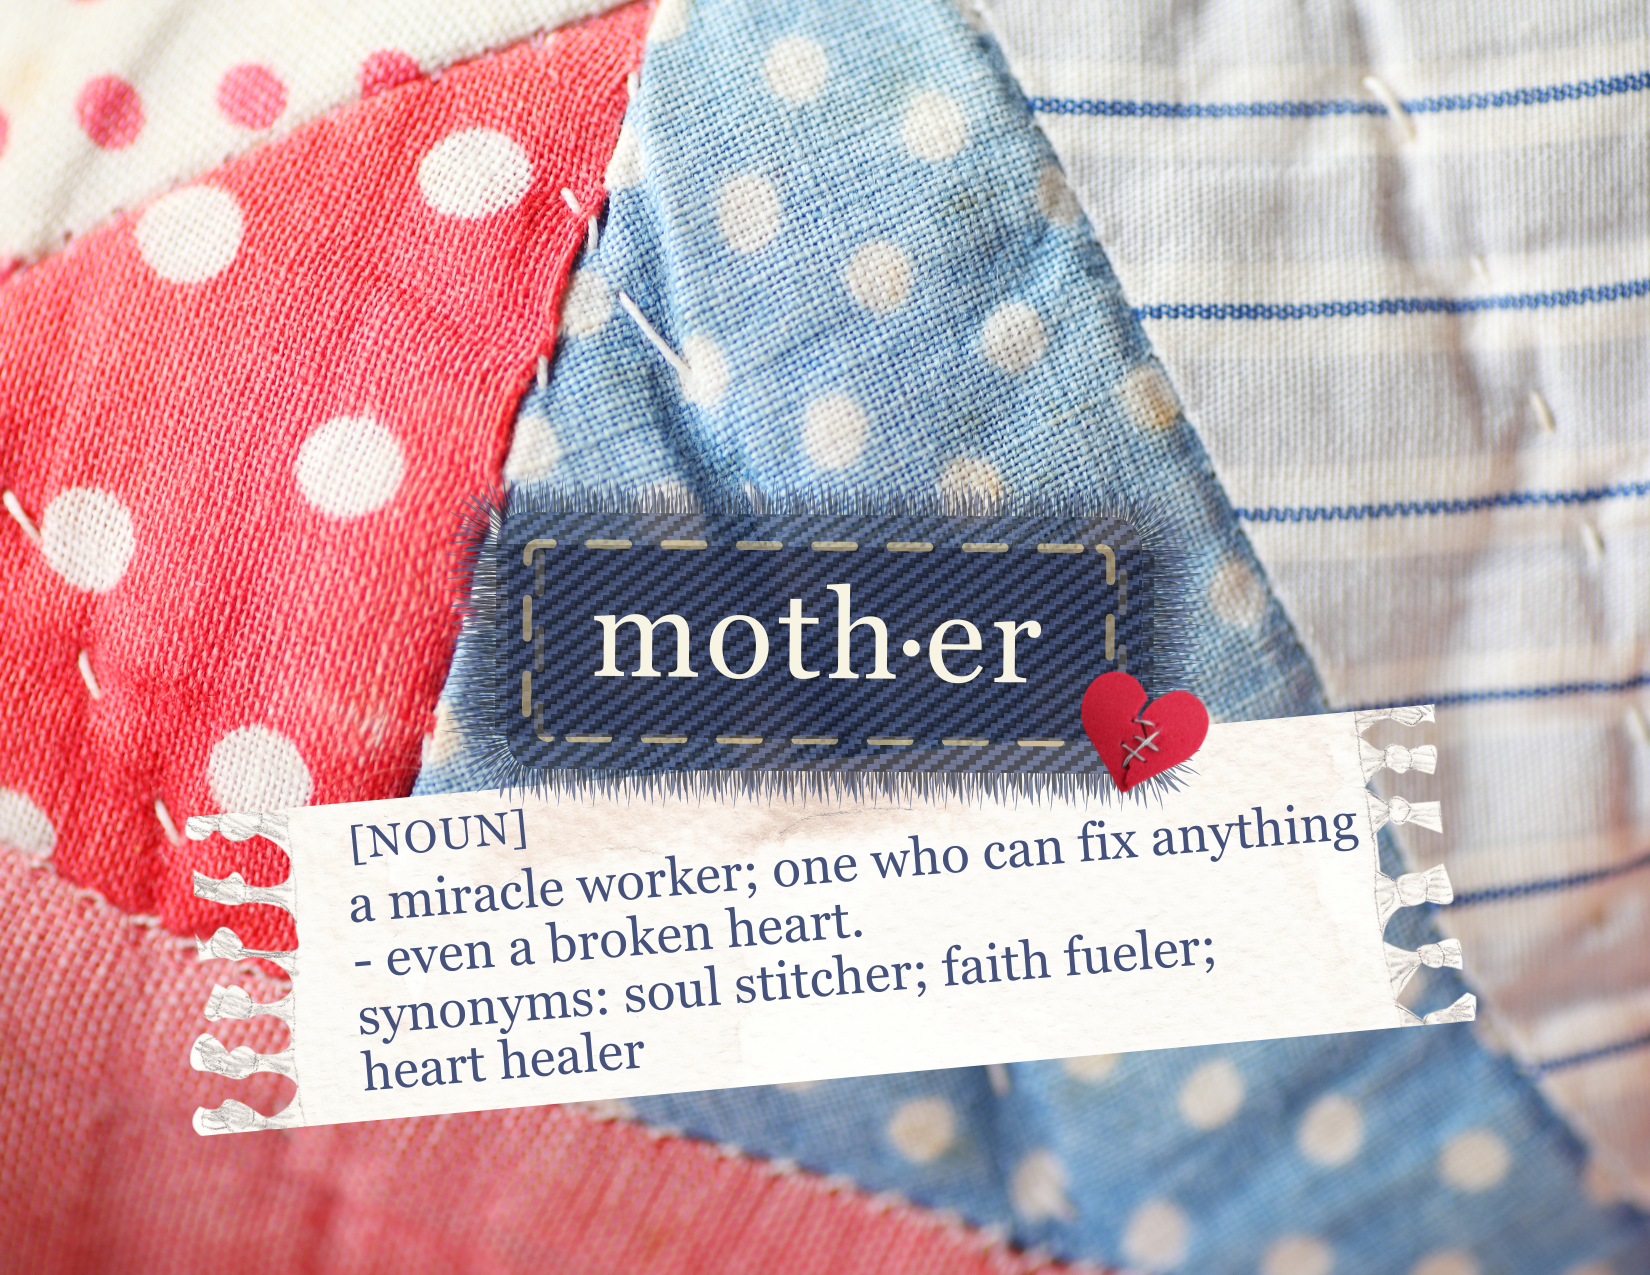 Mother: one who can fix anything